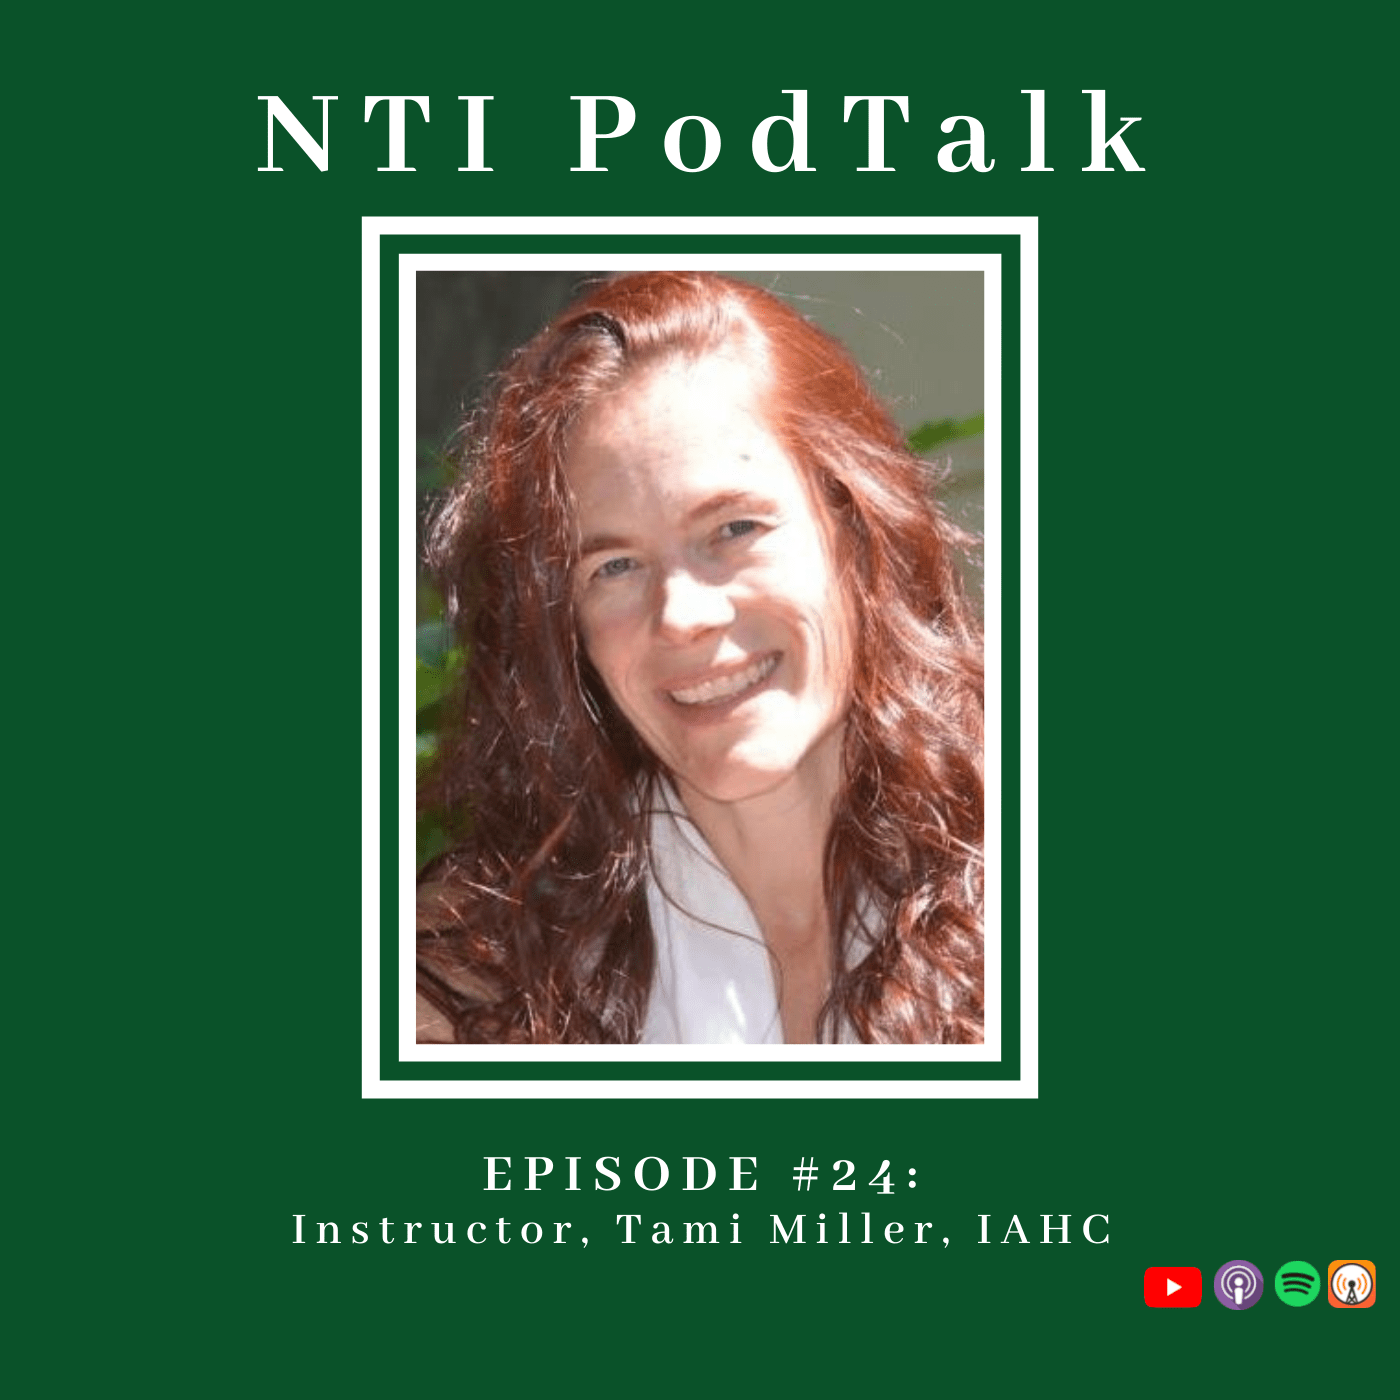 Featured image for “NTI PodTalk with Instructor, Tami Miller, IAHC”